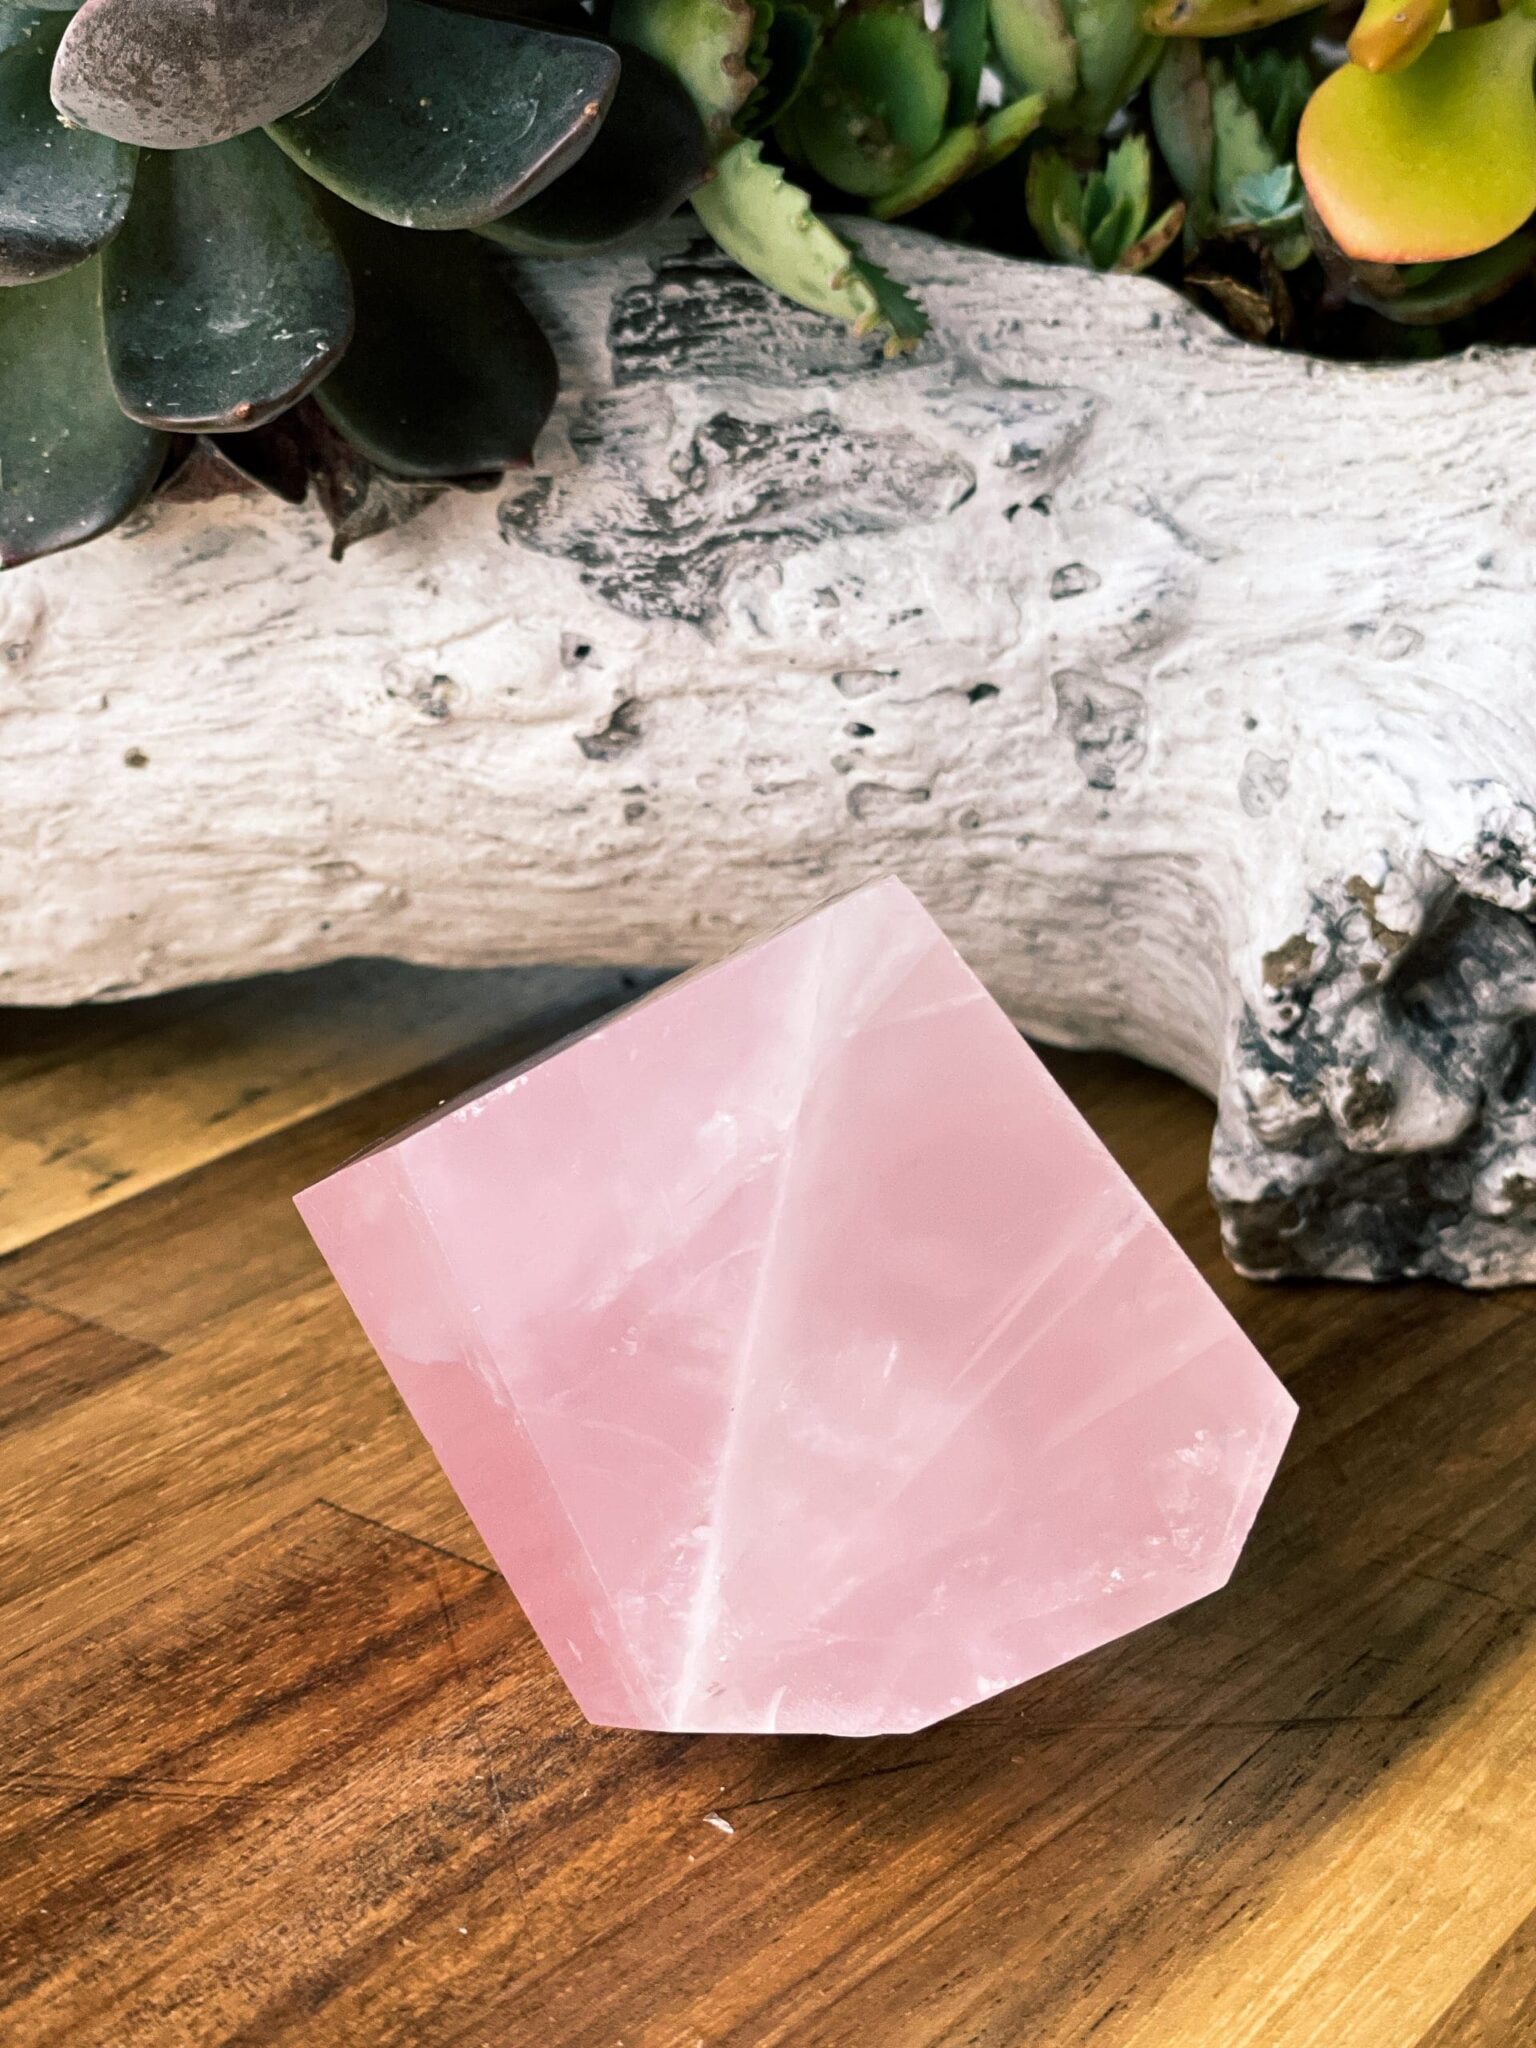 Rose Quartz: Meaning, Properties, Benefits You Should Know